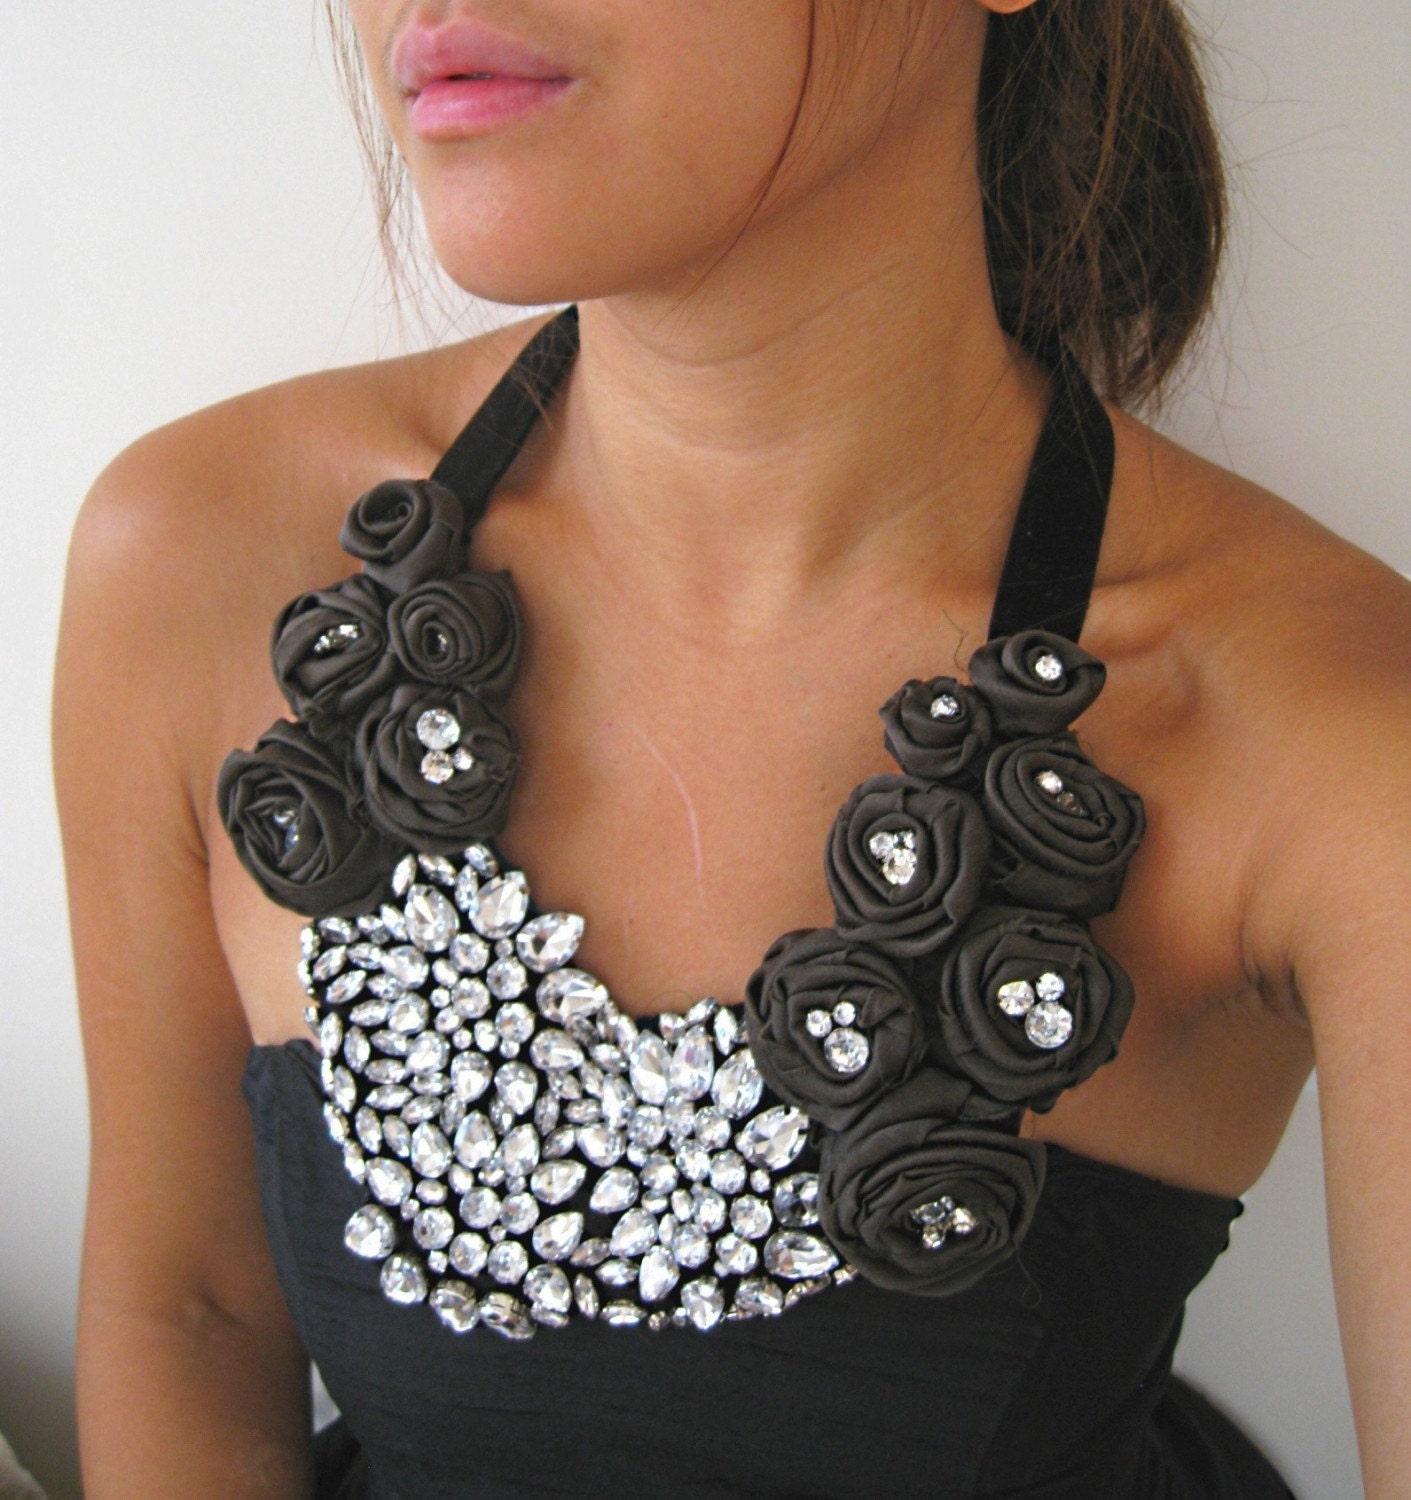 As seen on CNNGo.com - Night at the Oscars - A Crystal and Pure Silk Rosette Statement Bib Necklace